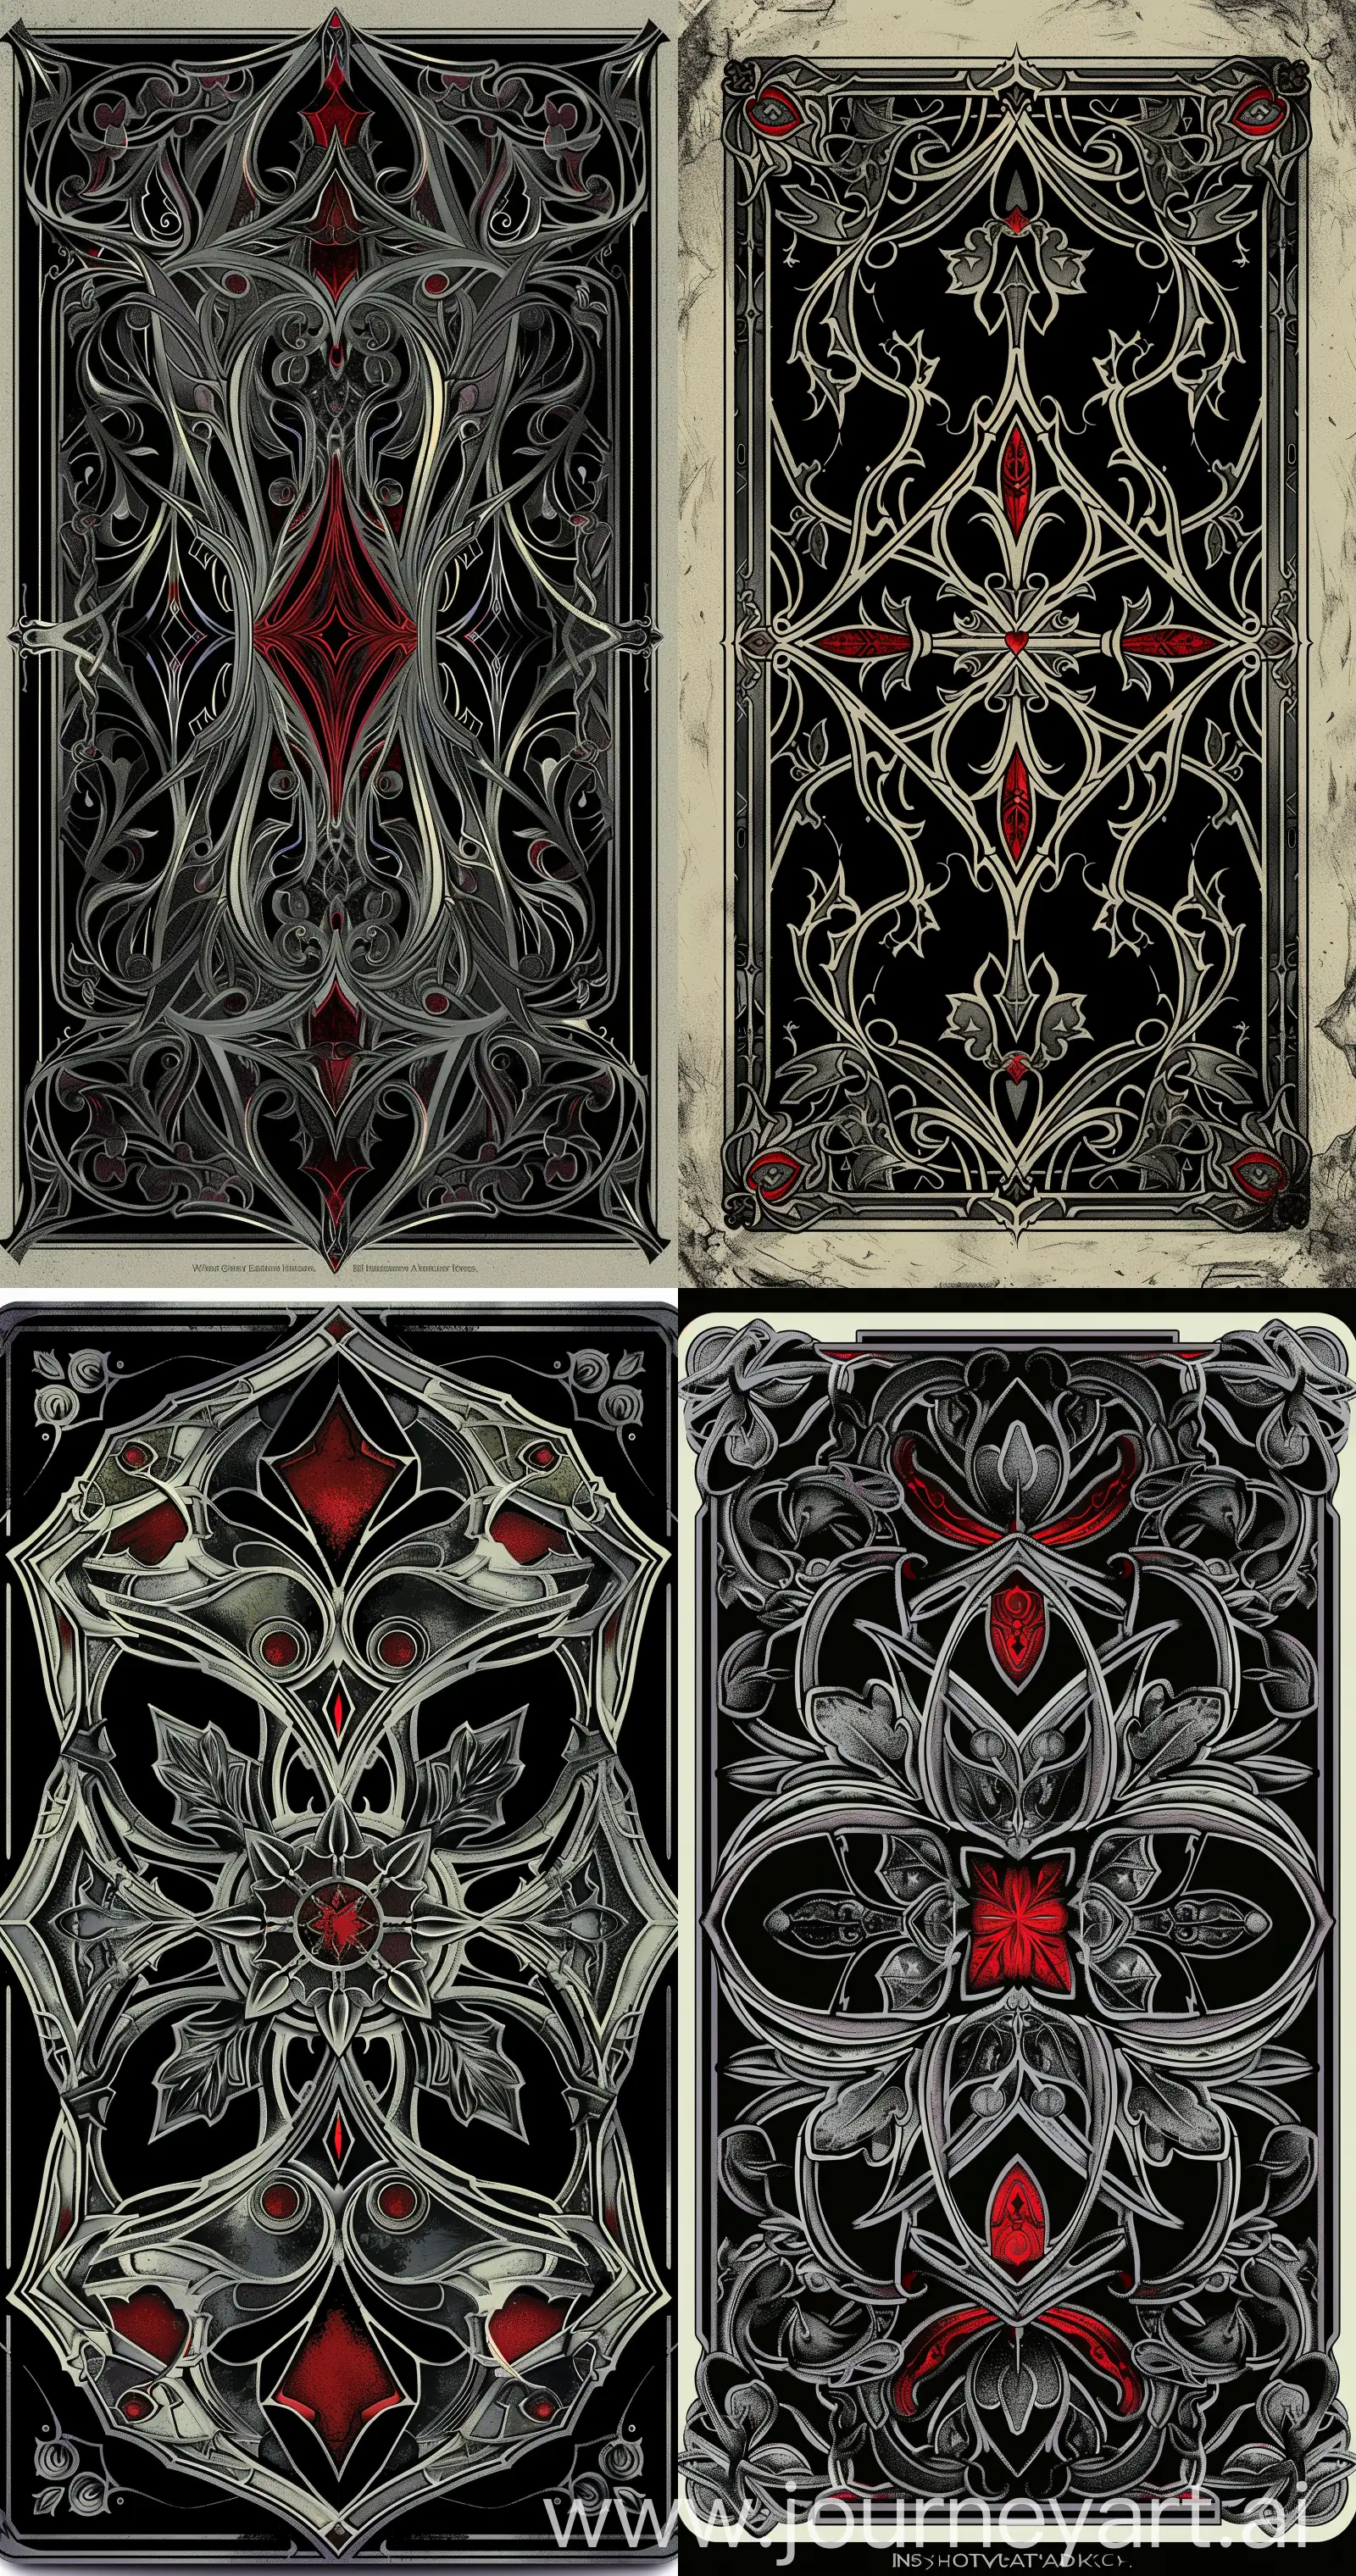 A card back, in the style of [Gothic], featuring [intricate details], [deep blacks and grays], [rich red], and [stylized stained glass]. Drawn all the way to the edges with no background visible. The card back should have a unique design, with elements of symmetry and repetition, Flat with no shadow, no script, while still maintaining a cohesive look and feel. The overall design should evoke a sense of [dark elegance], sophistication, and [gothic mystery], The final product should be high-quality, vector artwork, suitable for printing on the backs of standard playing cards. --ar 53:100 --v 6.0